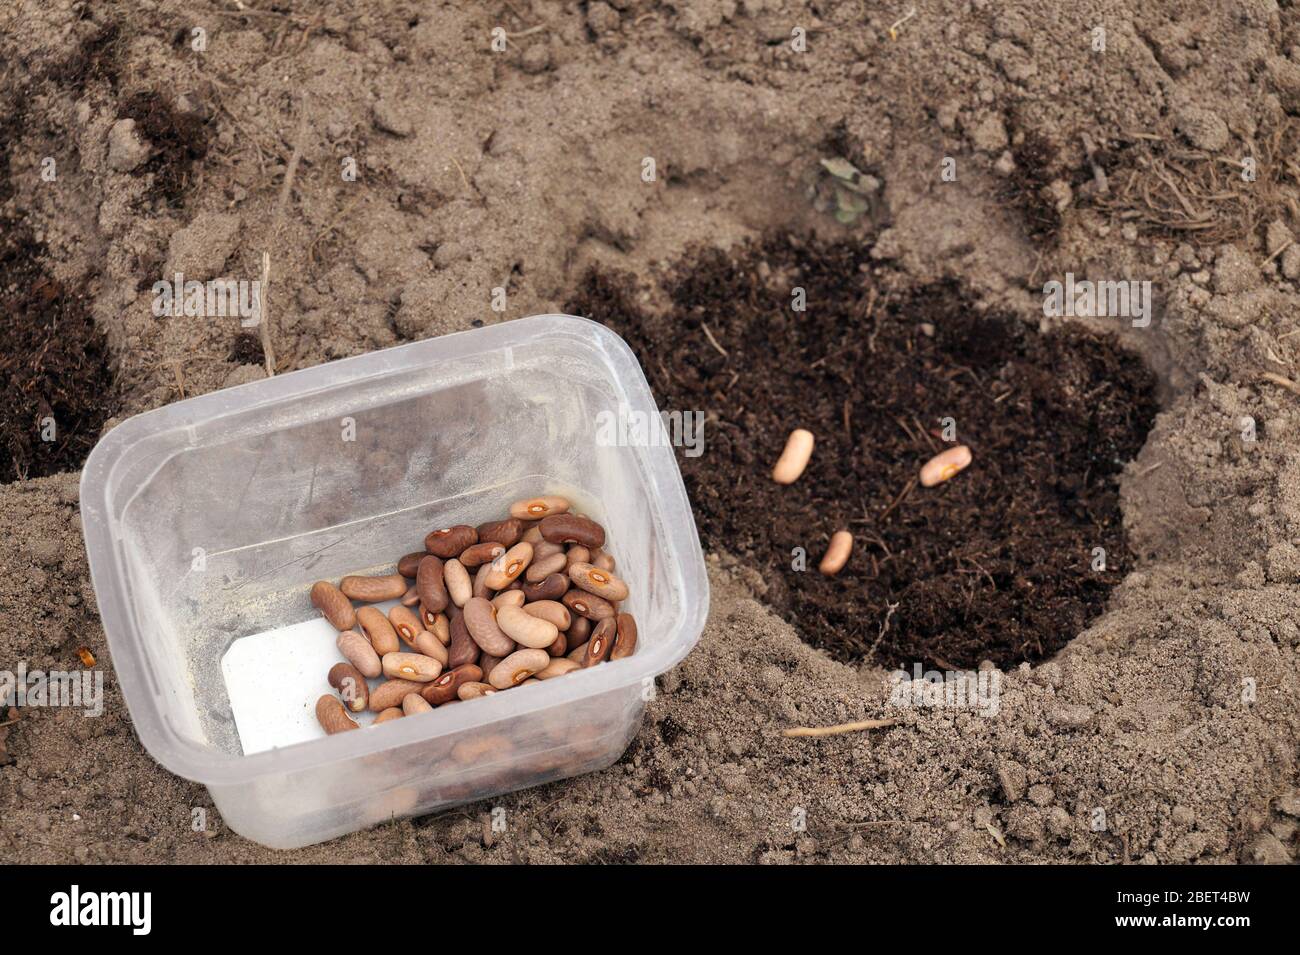 Sowing bean seeds in a home garden. Container with seeds for sowing. Stock Photo